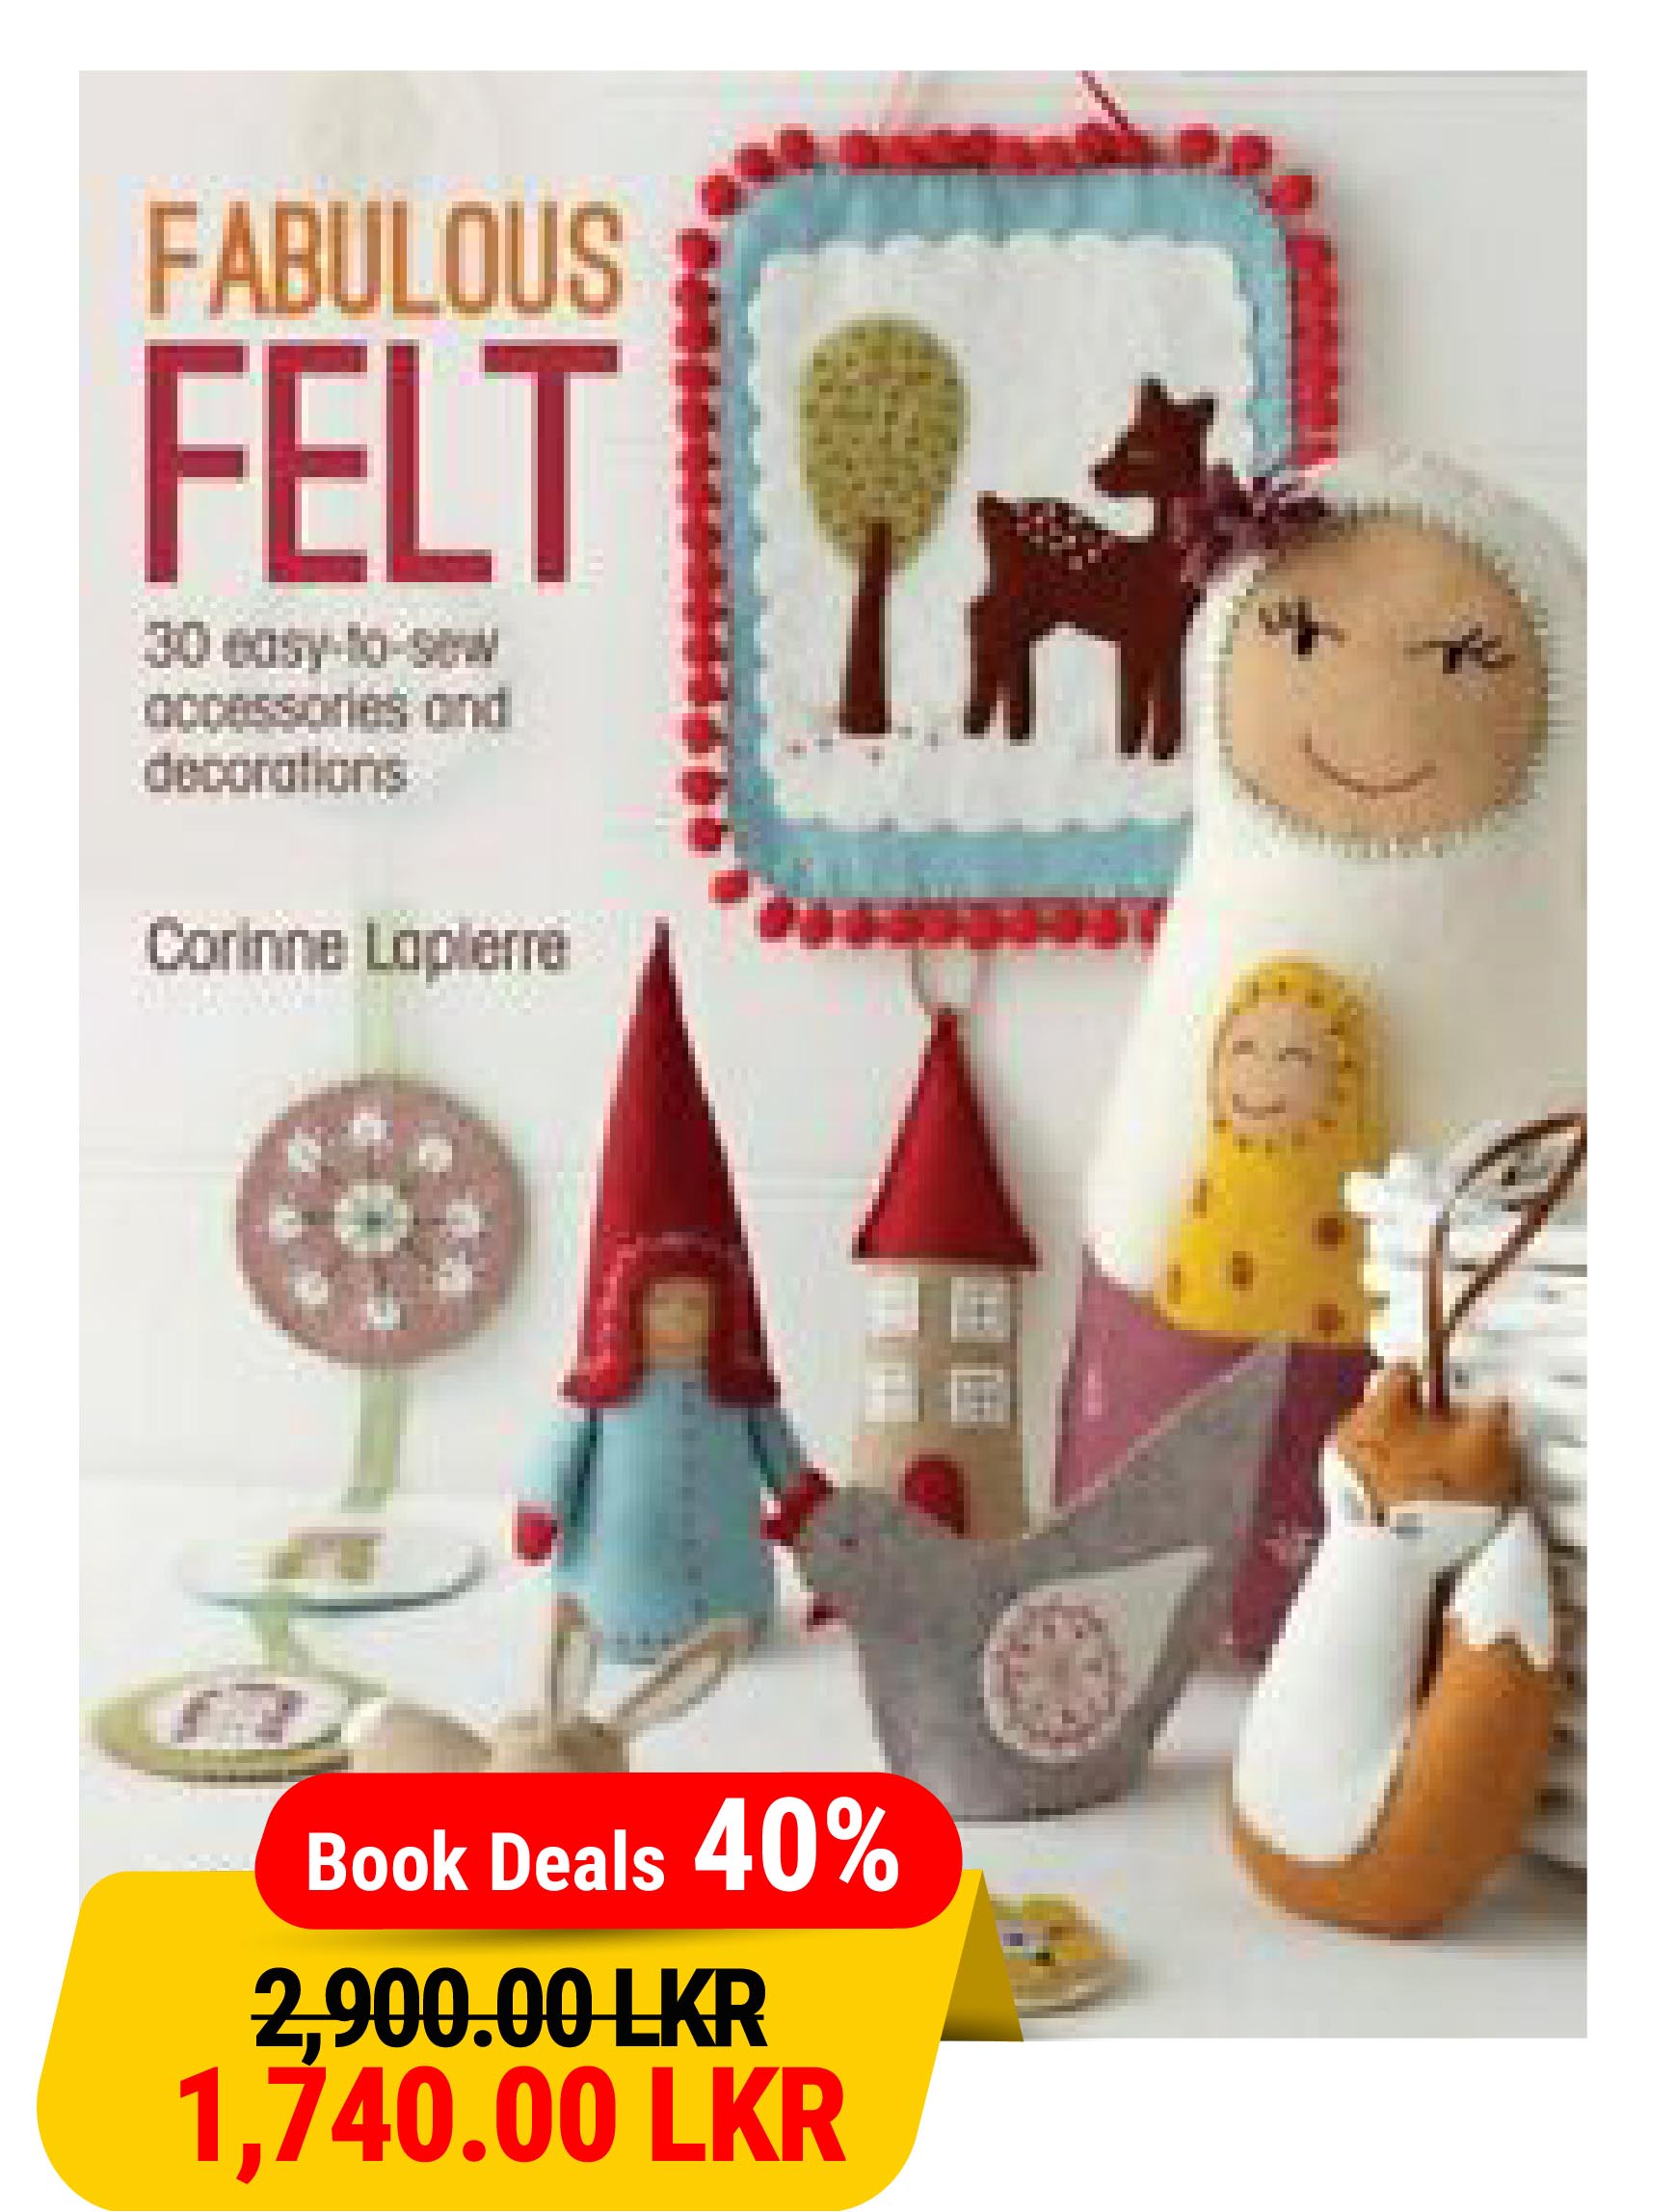 Fabulous Felt: 30 easy-to-sew accessories and decorations